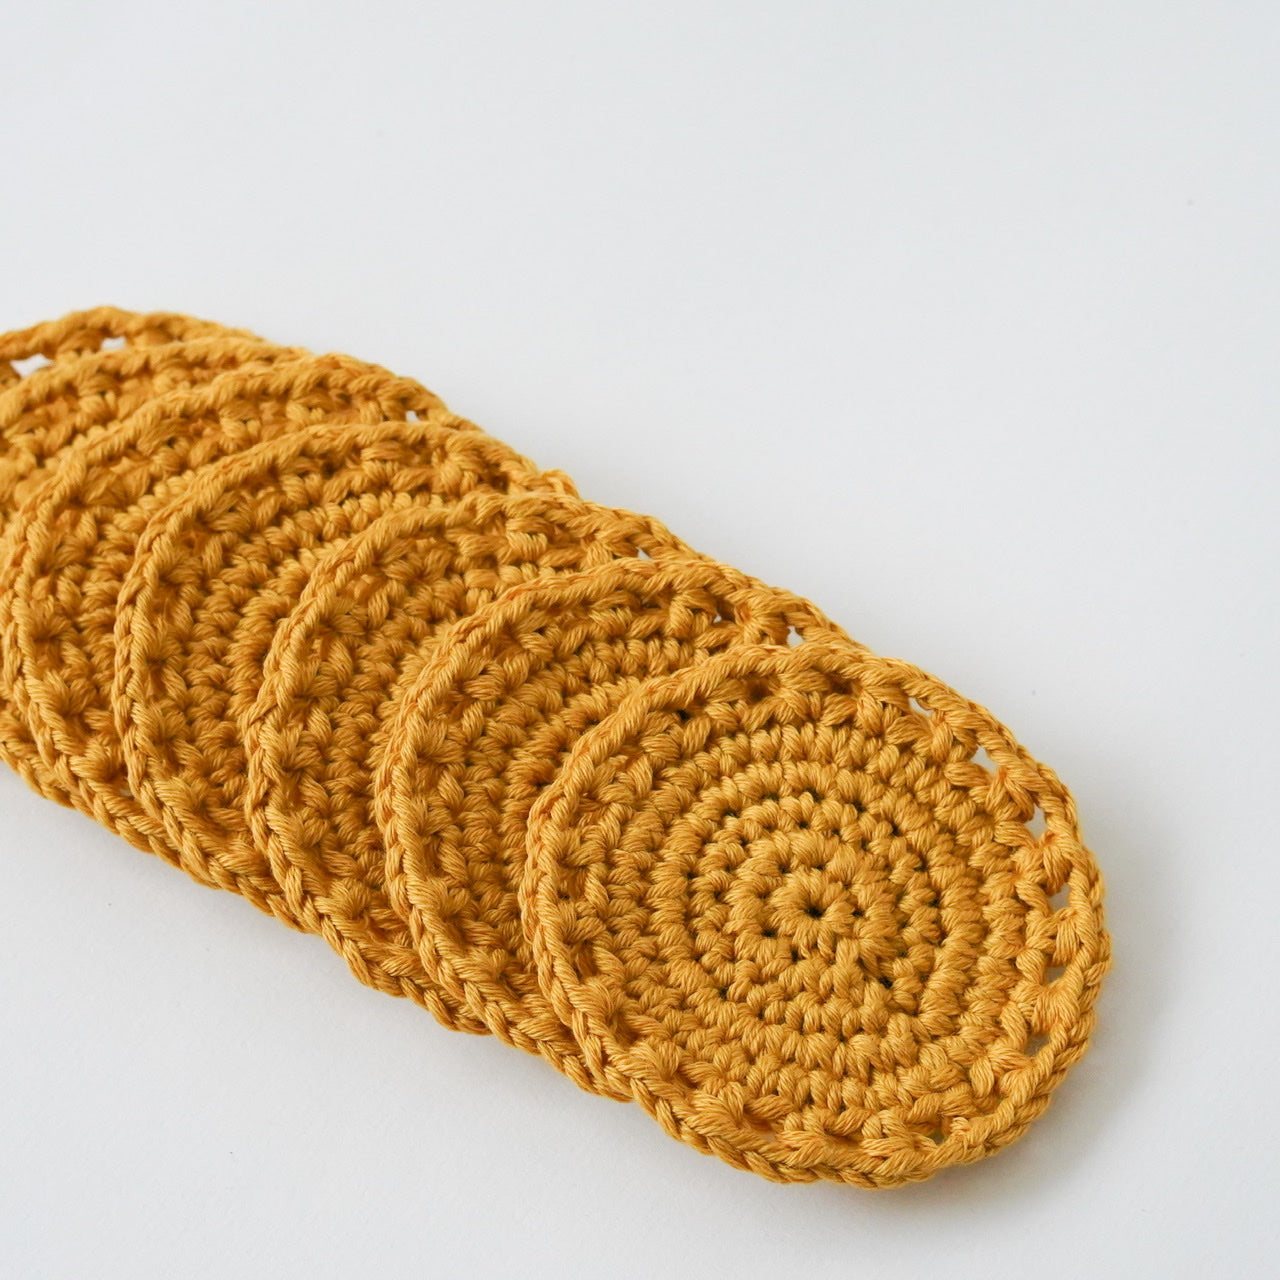 Hand-crafted-crochet-reusable-sustainable-zero-waste-cosmetic-pads